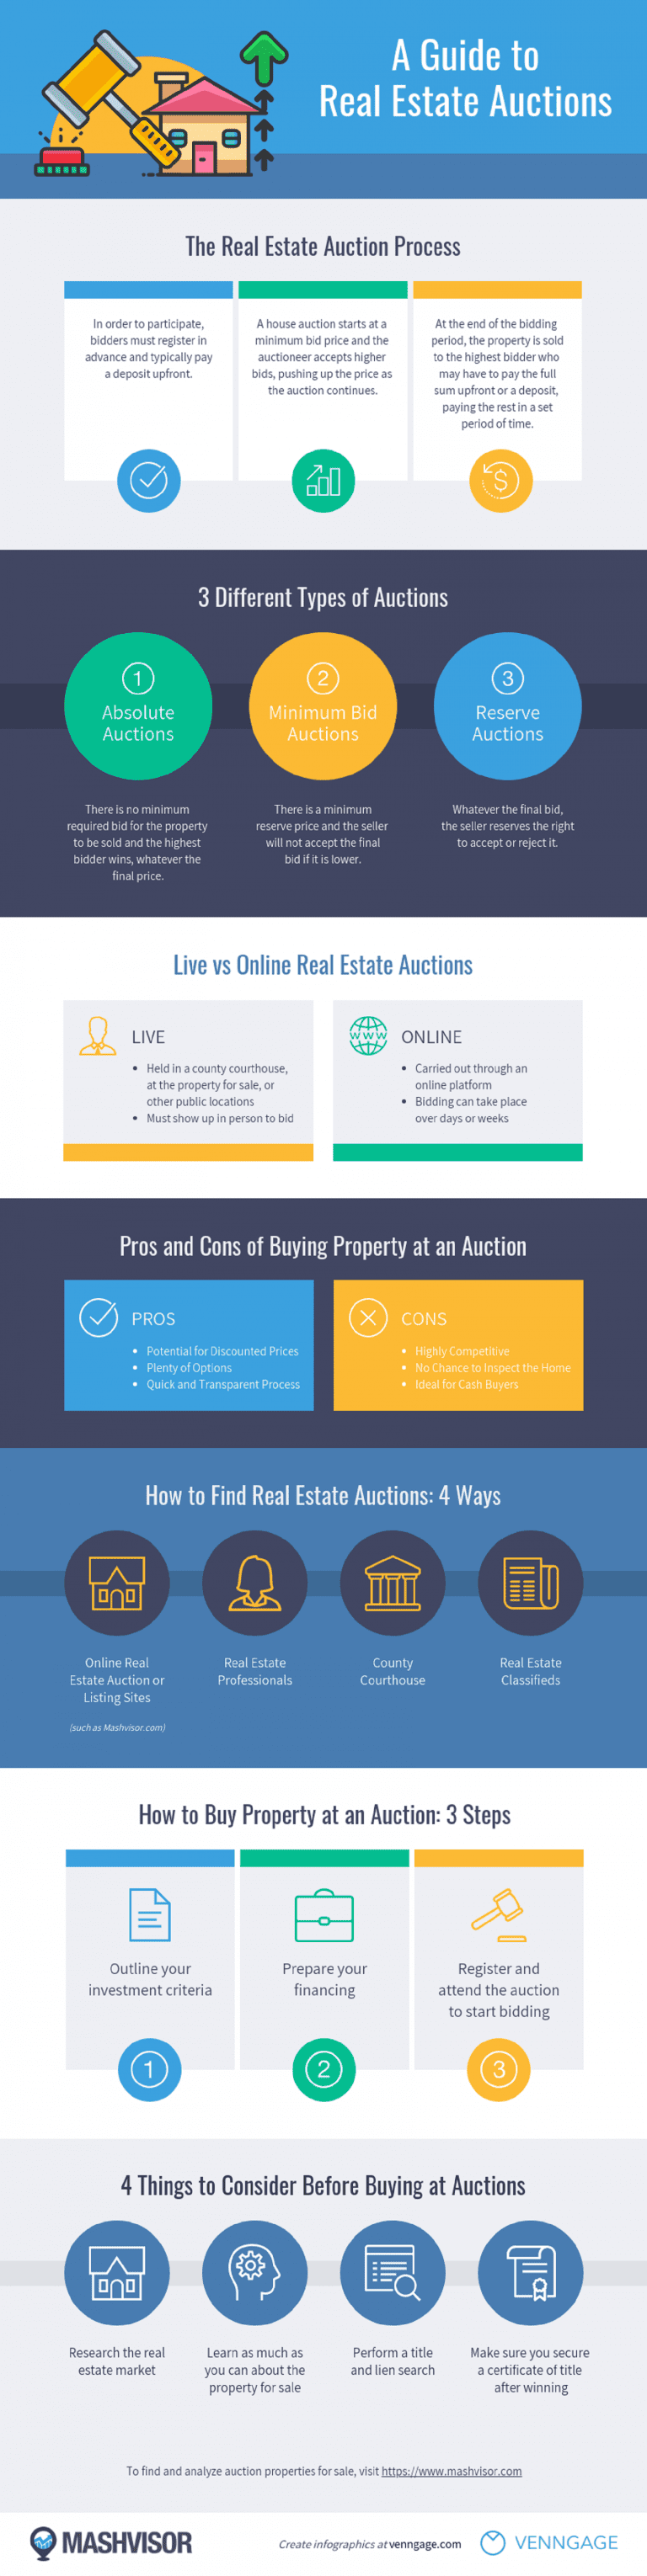 All you need to know about real estate auctions